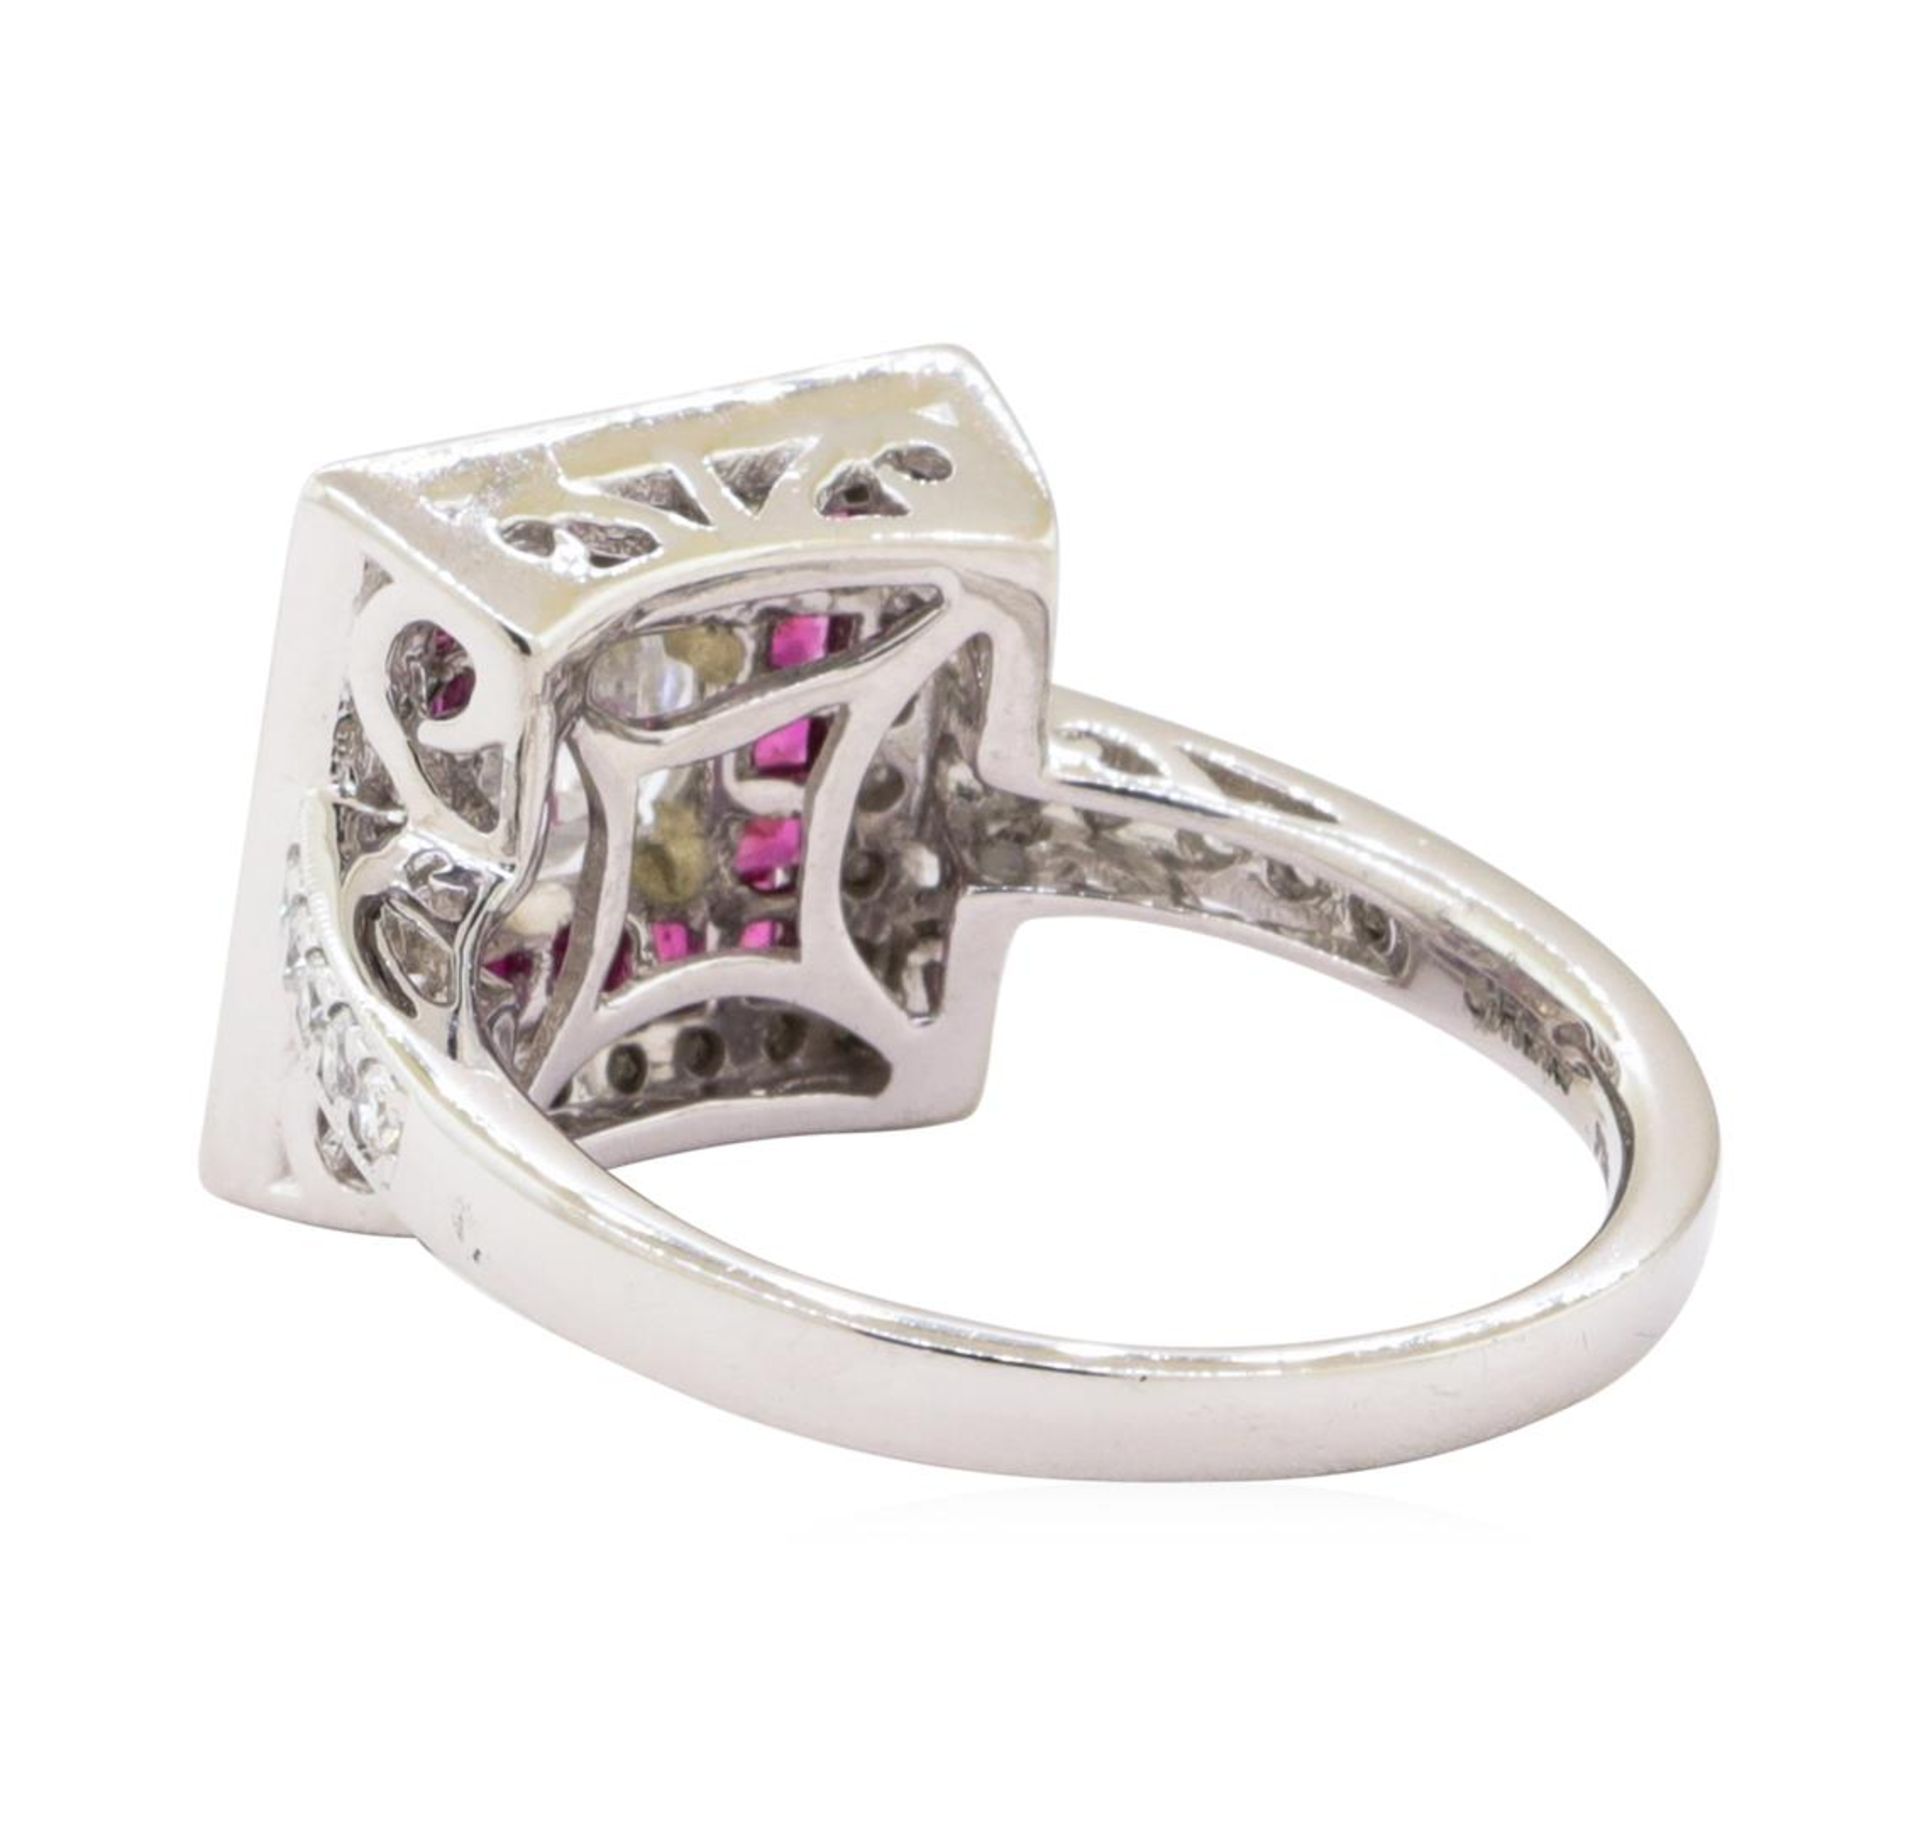 0.68 ctw Ruby and Diamond Ring - Platinum - Image 3 of 4